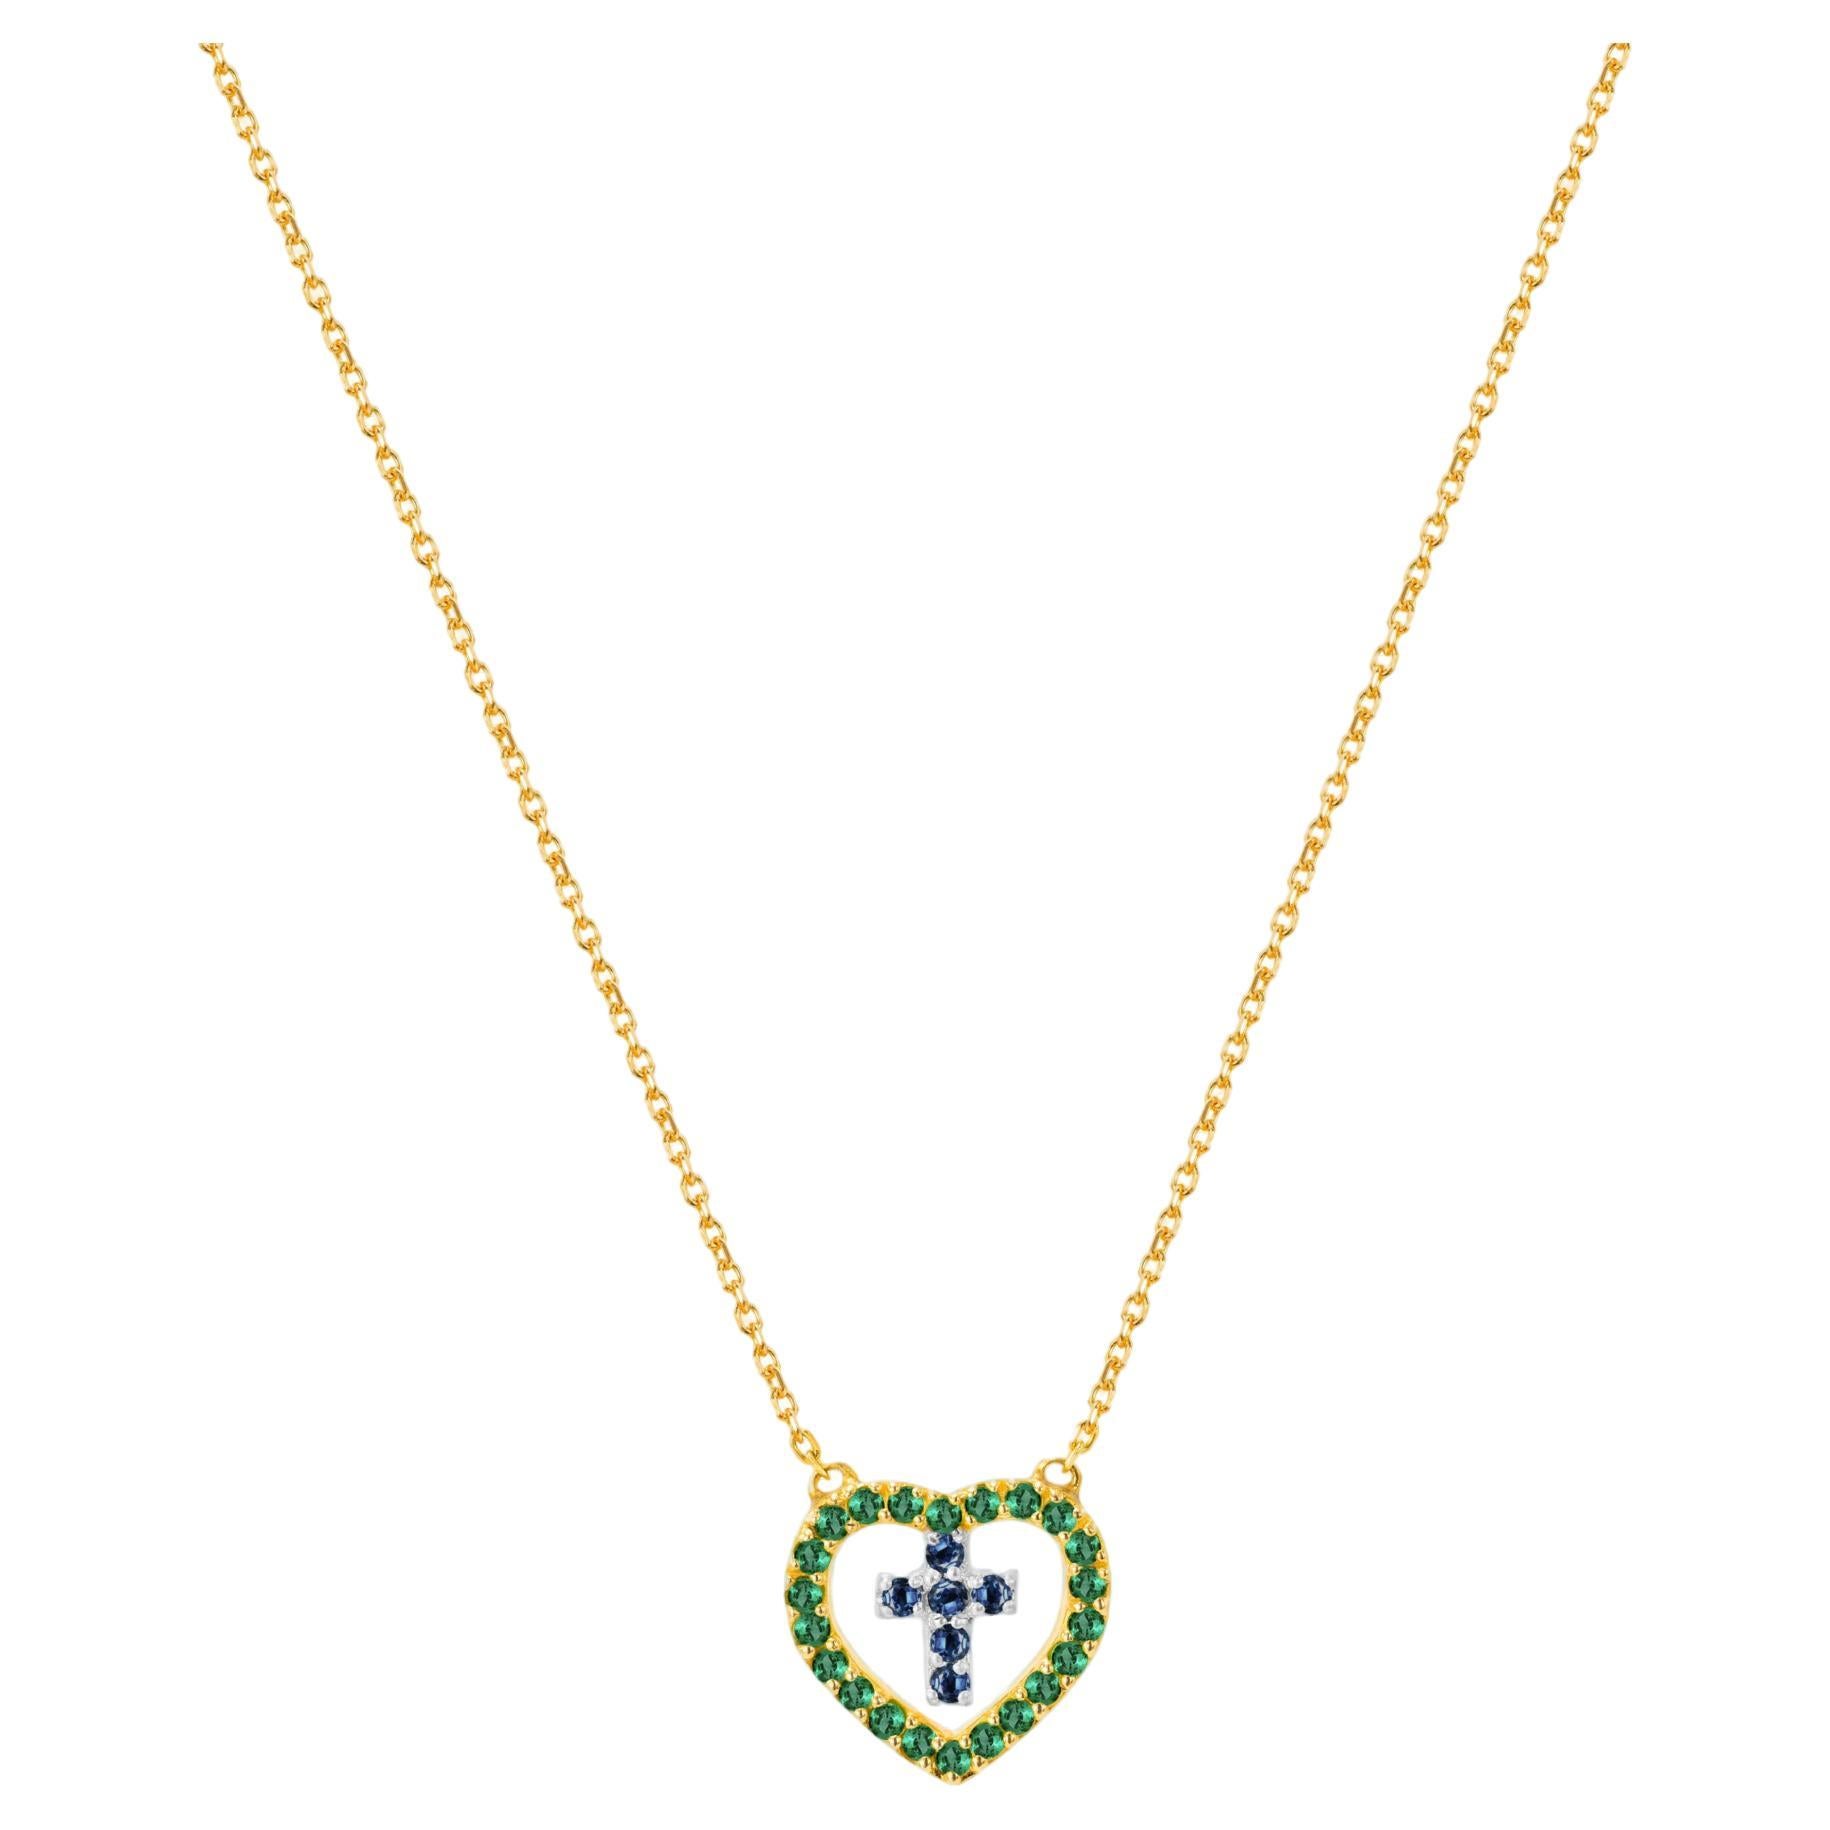 18k Gold Genuine Emerald and Blue Sapphire Necklace Cross in Heart Necklace For Sale